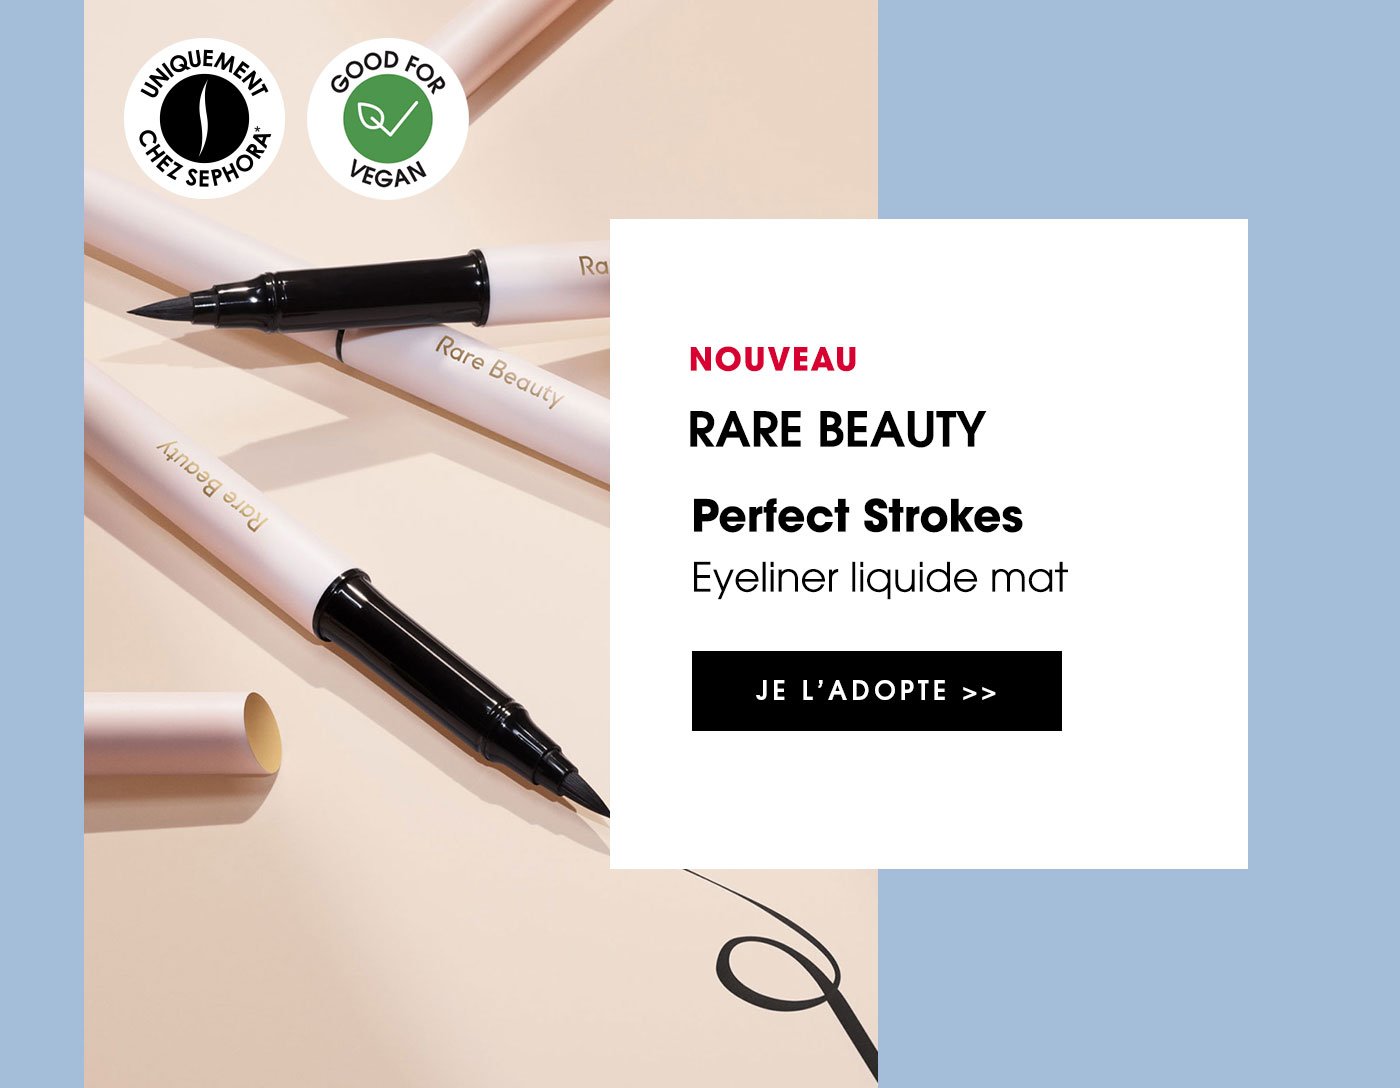 RARE BEAUTY Perfect Strokes - Eyeliner liquide mat | JE L’ADOPTE >>